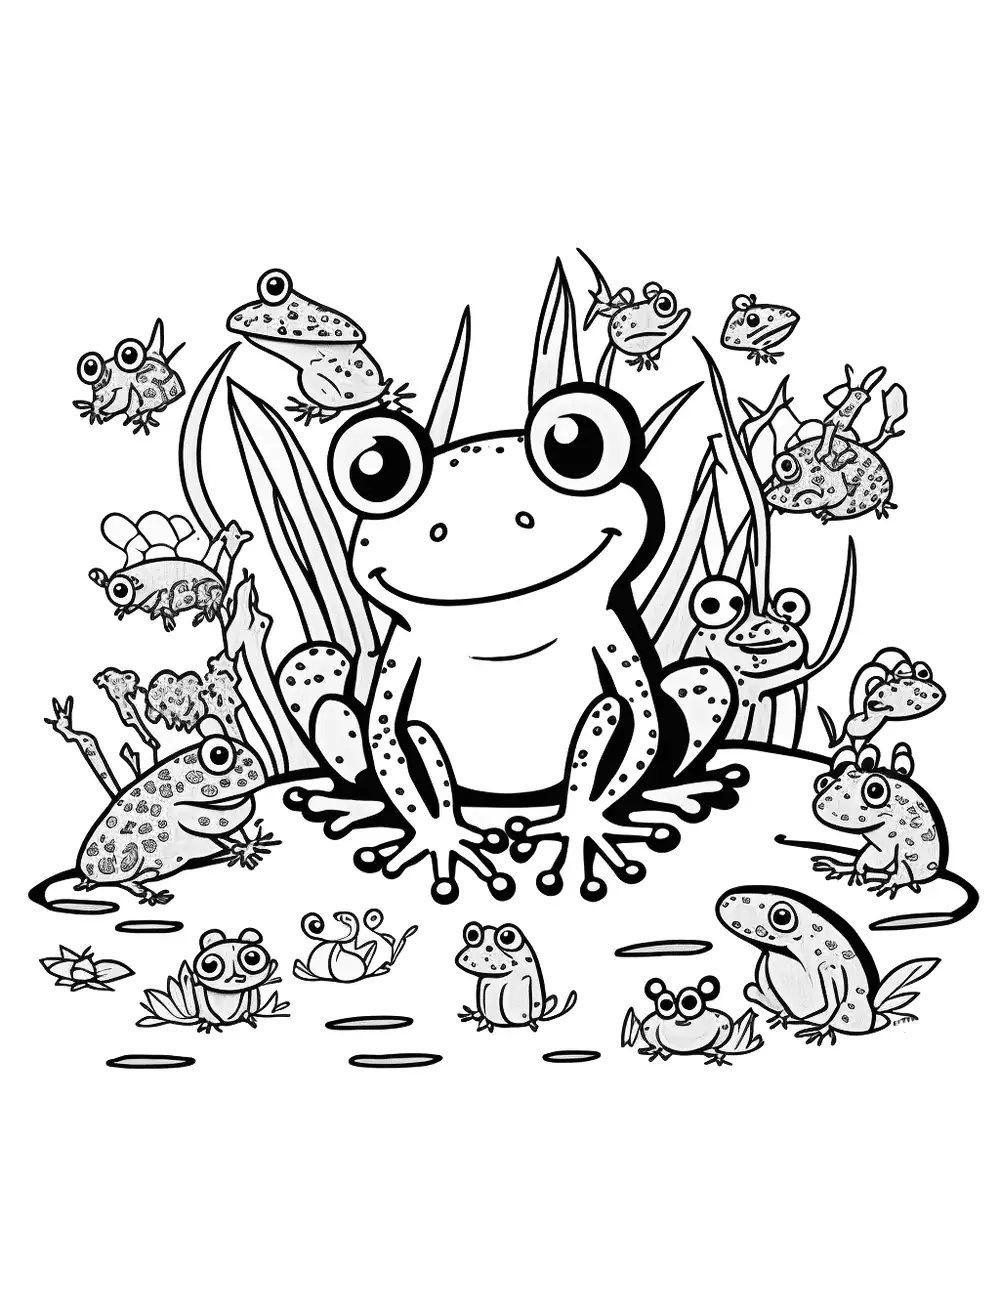 Frogs and Bugs Frog Coloring Page - A group of frogs hunting and eating bugs.